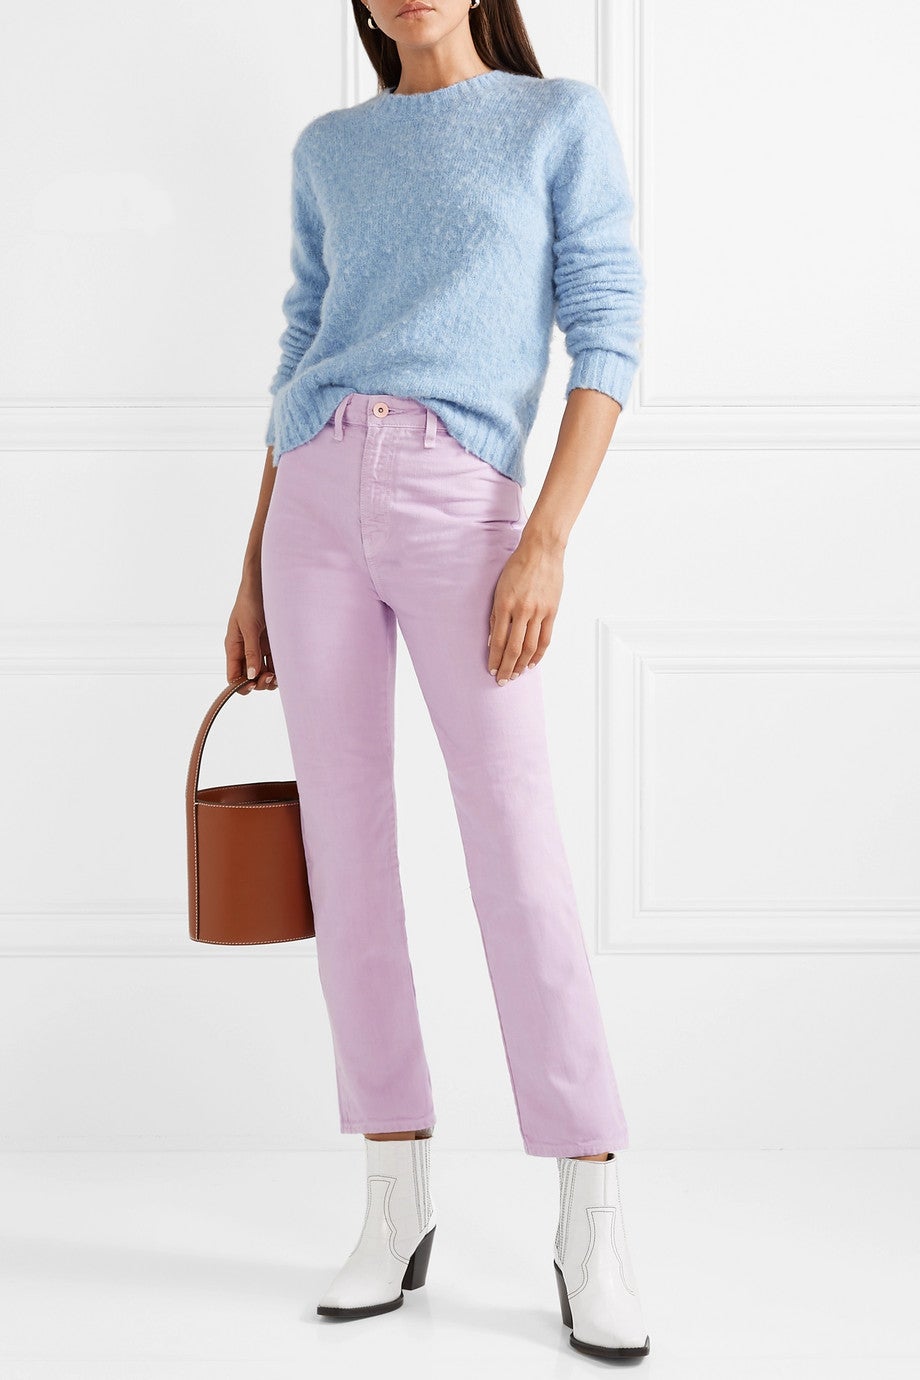 Staud + Blonde Two-Tone High-Rise Jeans